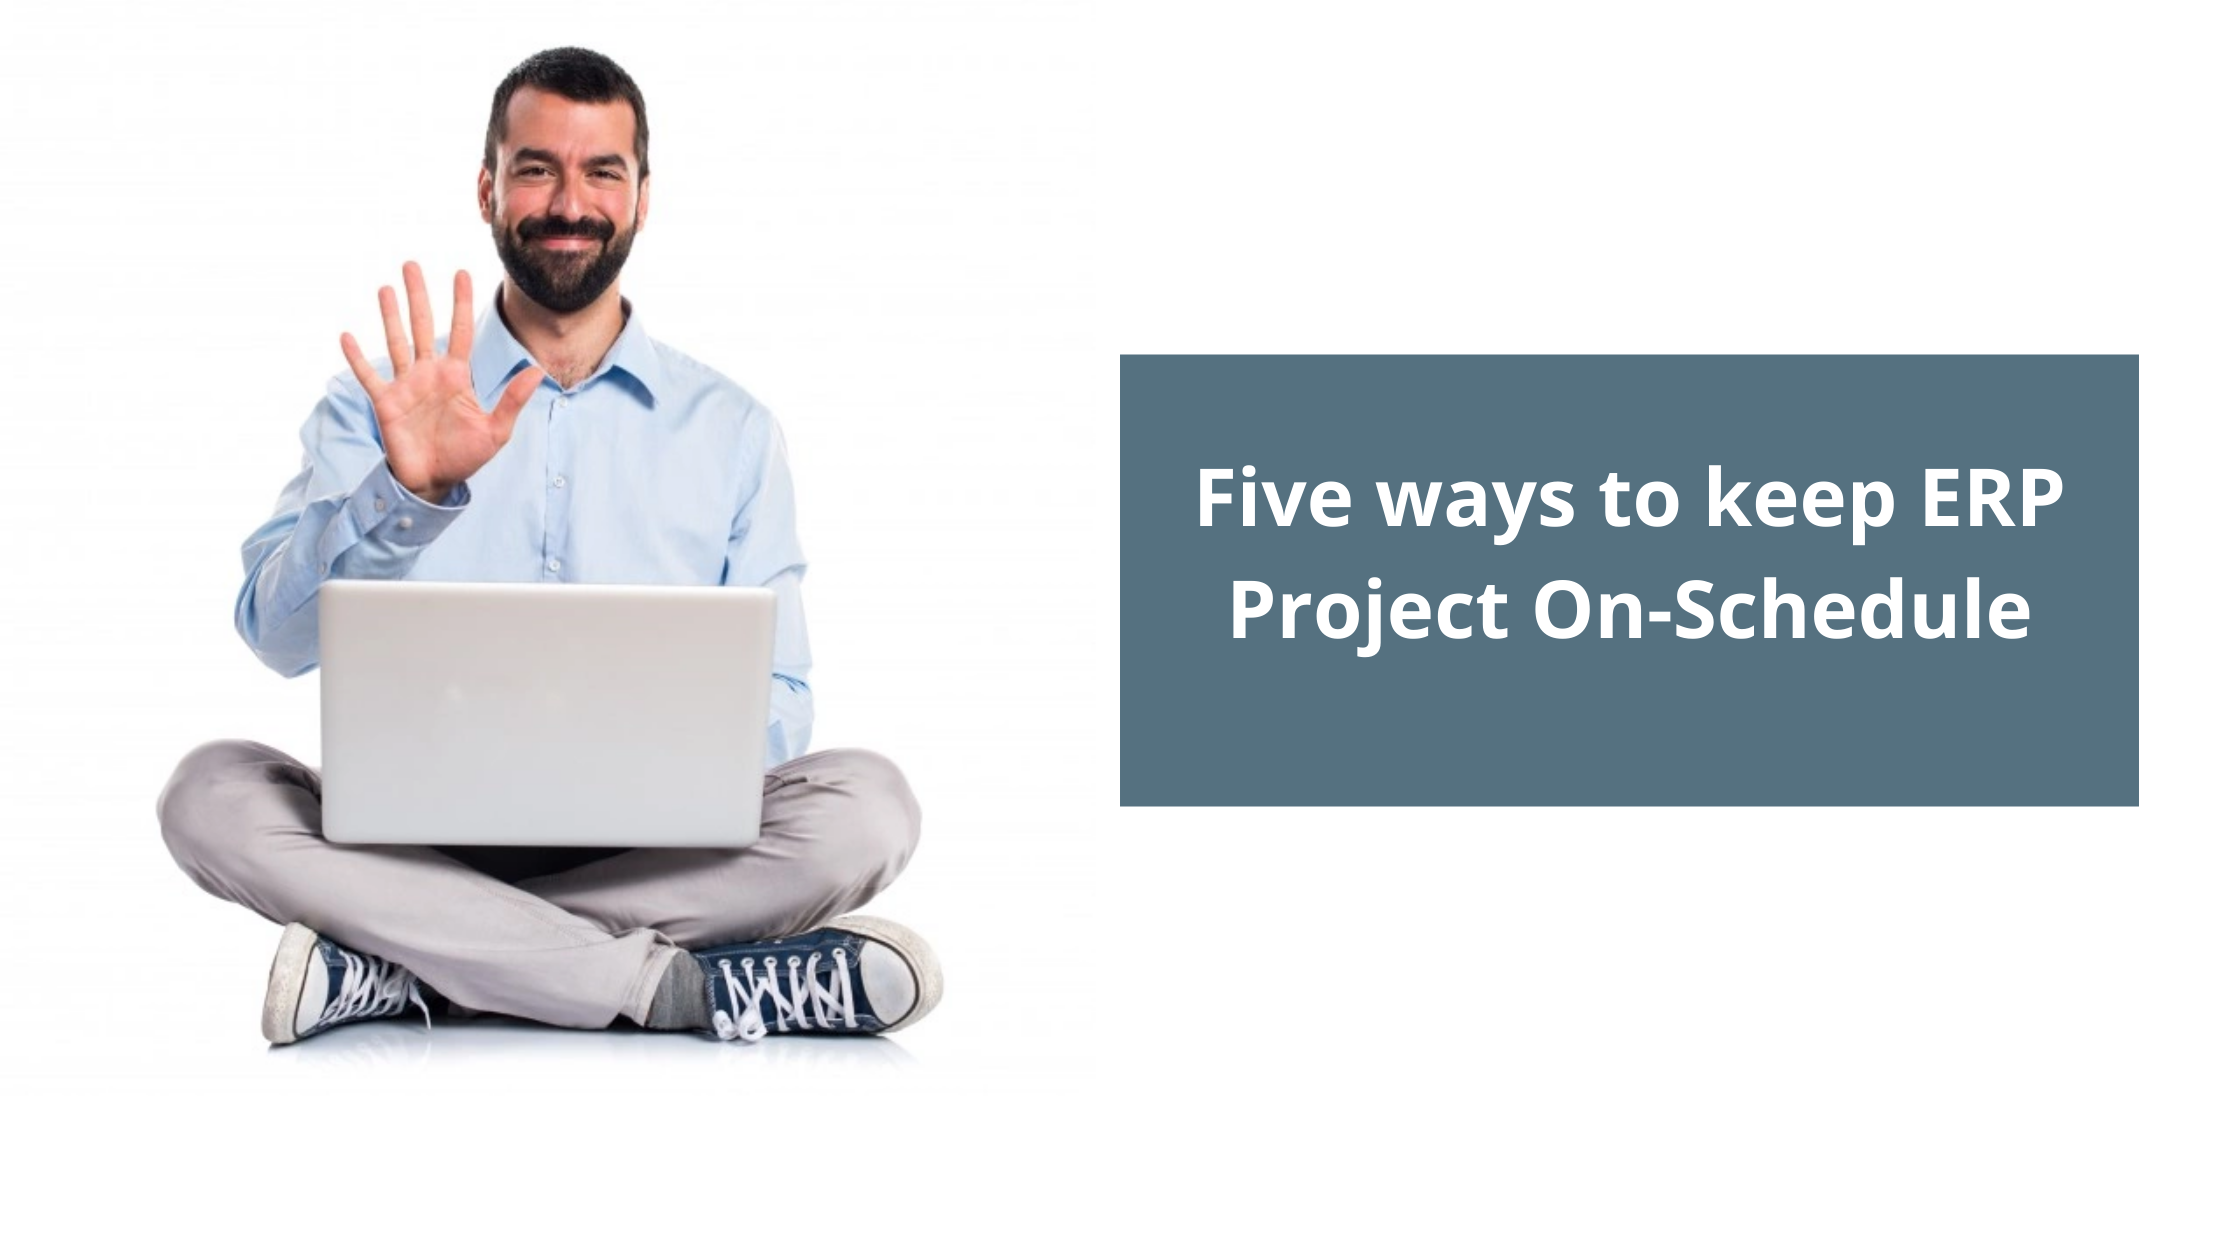 Five ways to keep ERP Project On-Schedule